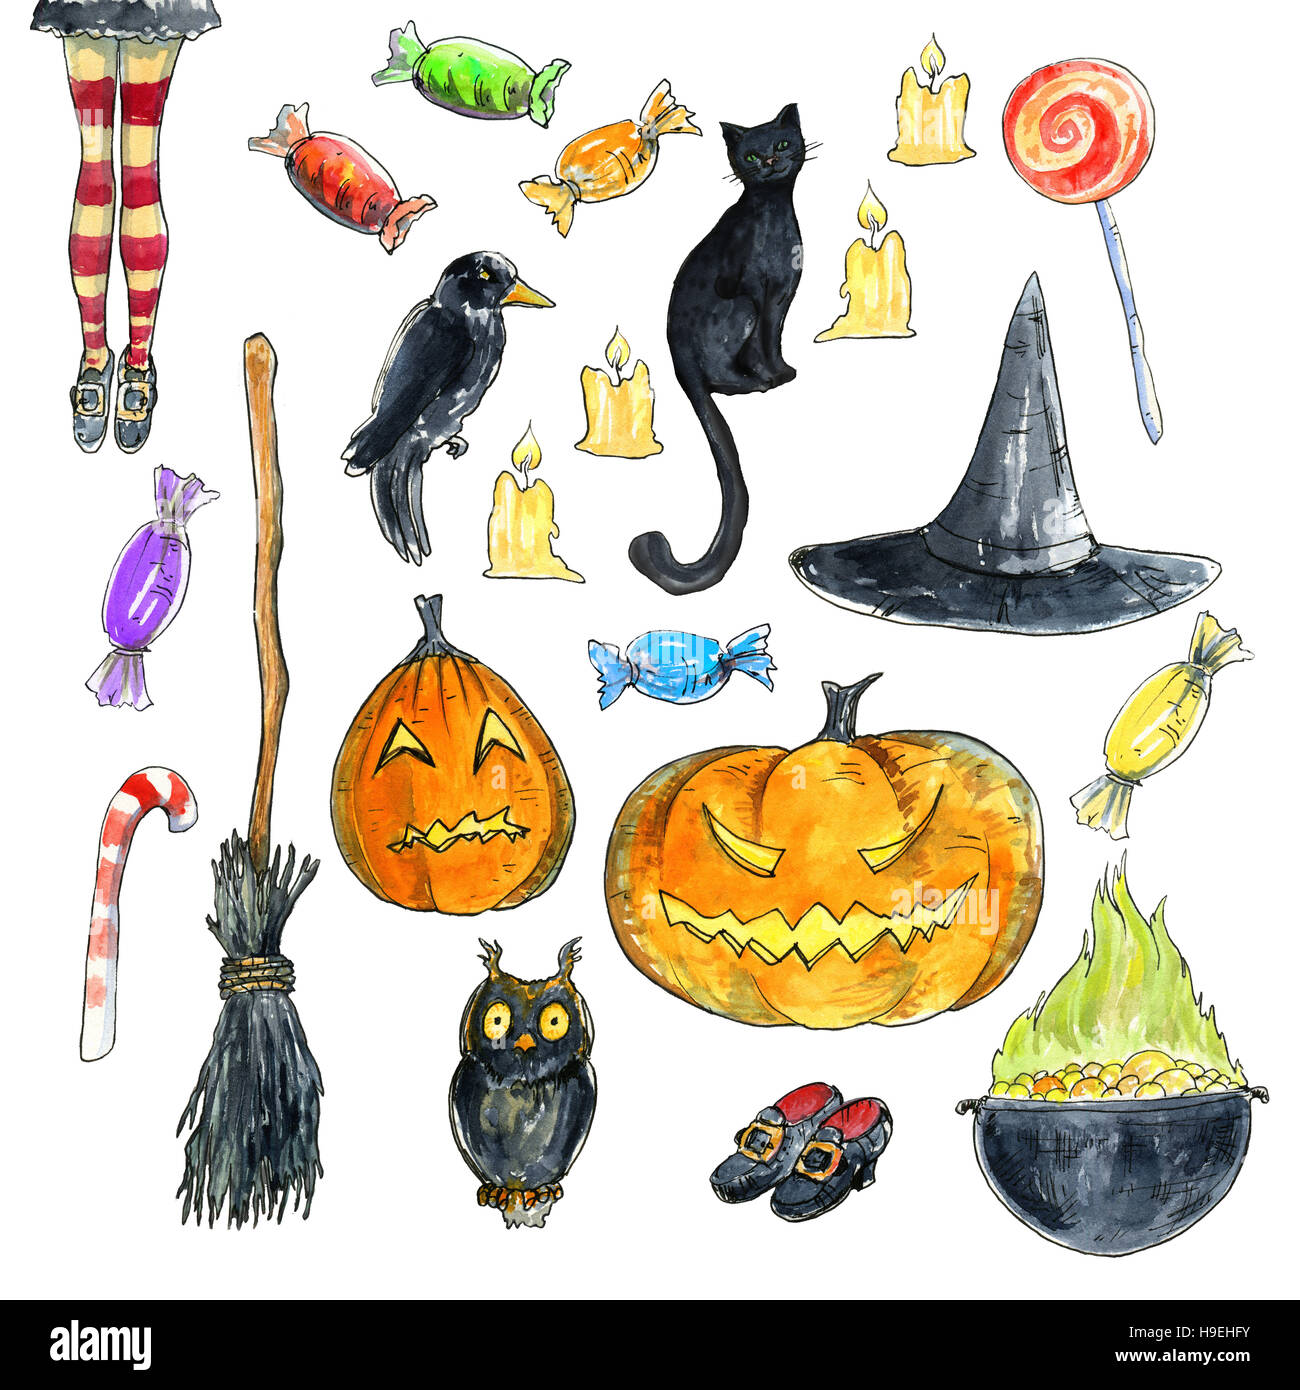 Watercolor collection. Set of hand drawn hand drawn halloween illustrations Stock Photo